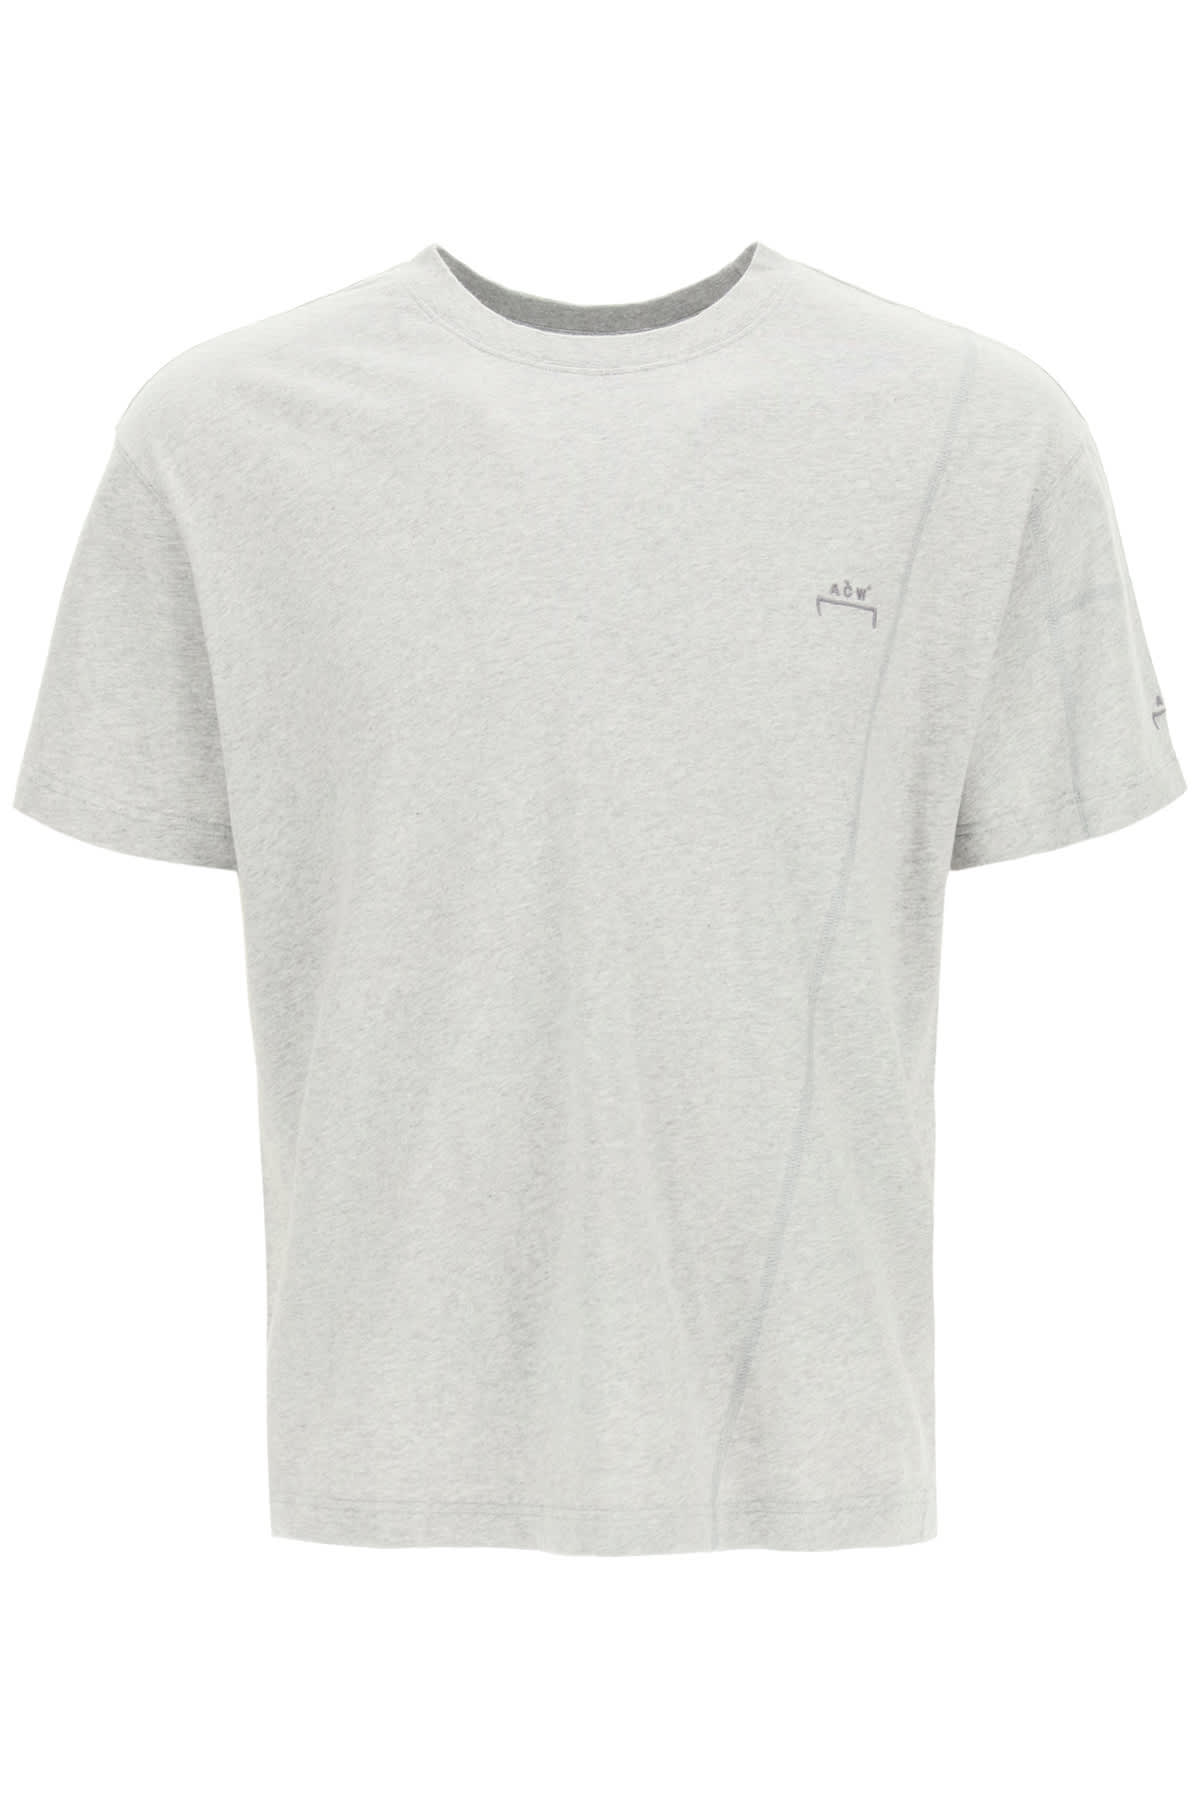 A-COLD-WALL Essential T-shirt With Logo Embroidery